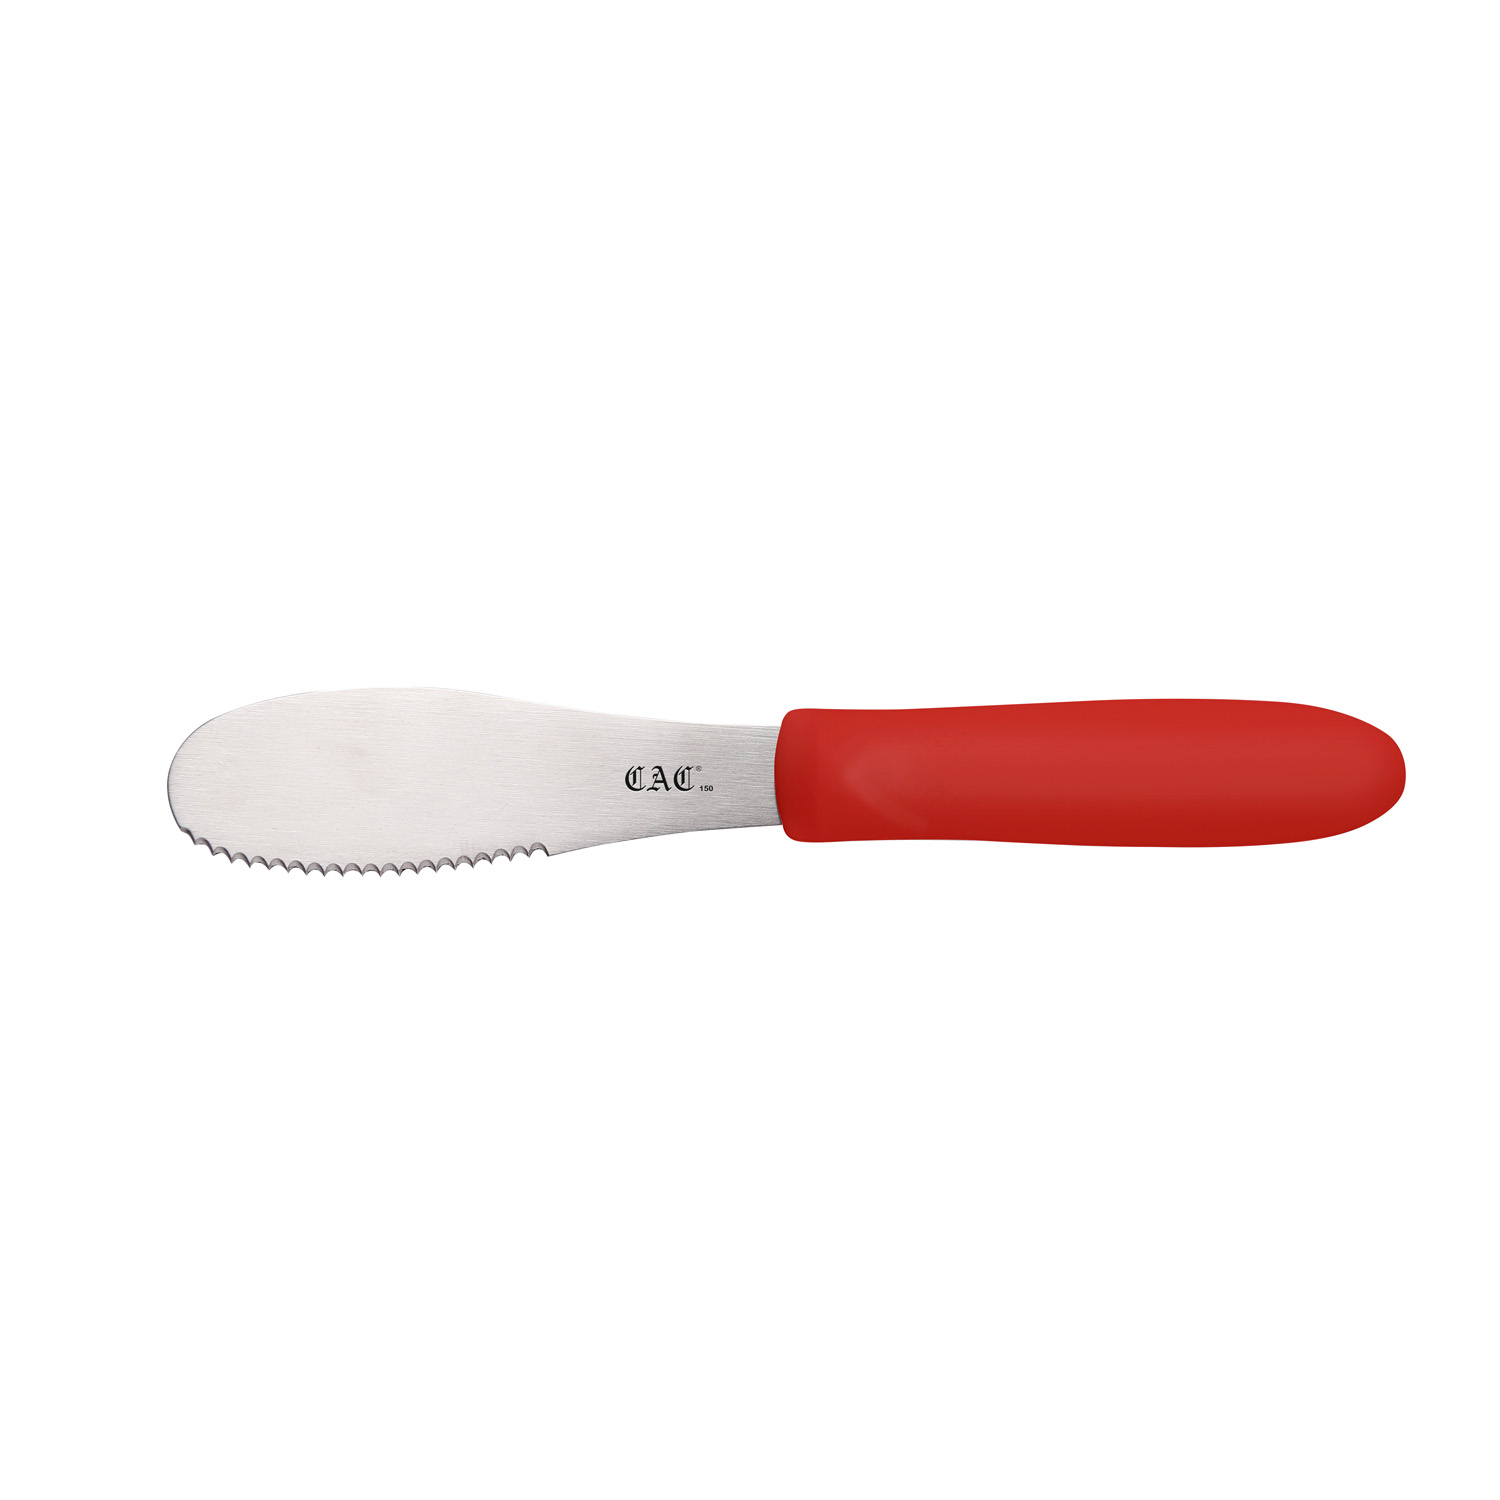 CAC China SPSP-4RD Red Serrated Spreader with Plastic Handle 3-7/8"